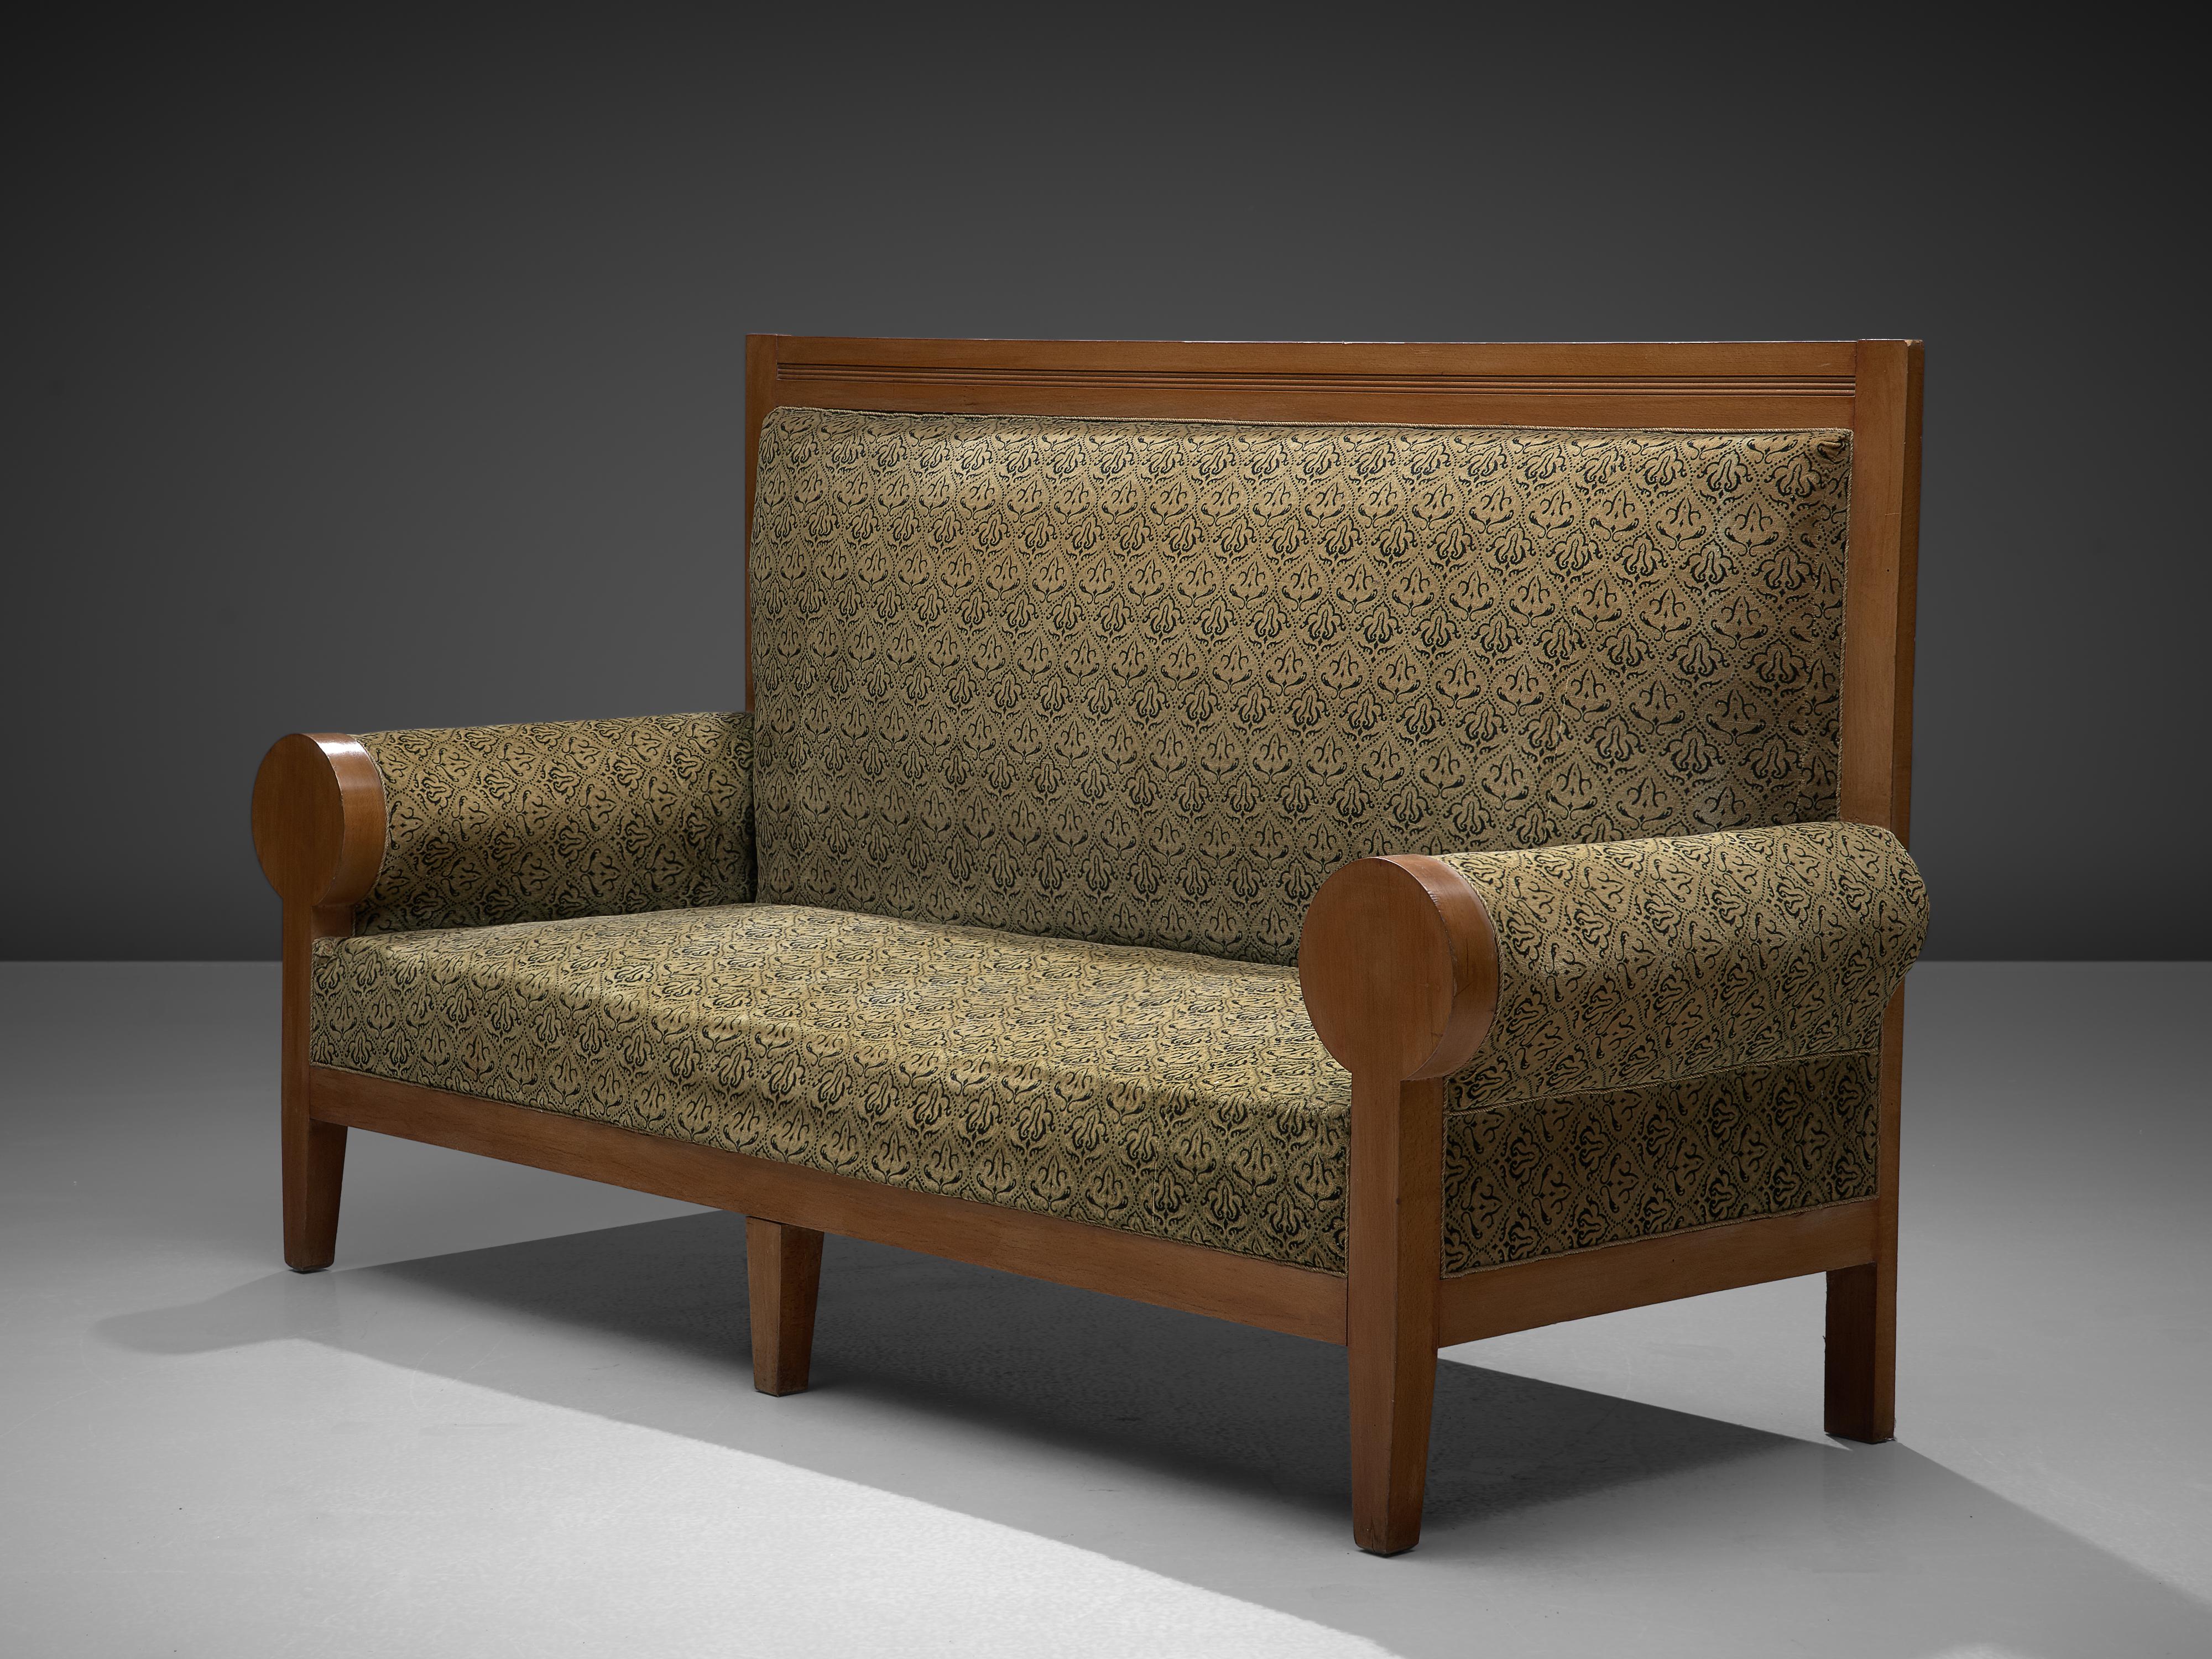 Sofa, beech, fabric, Europe, 1940s

This sofa is a beautiful piece made in the late Art Deco period in Europe. It has a very strong appearance, due the high back and the angular shapes in the design. The appearance of this sofa comes across